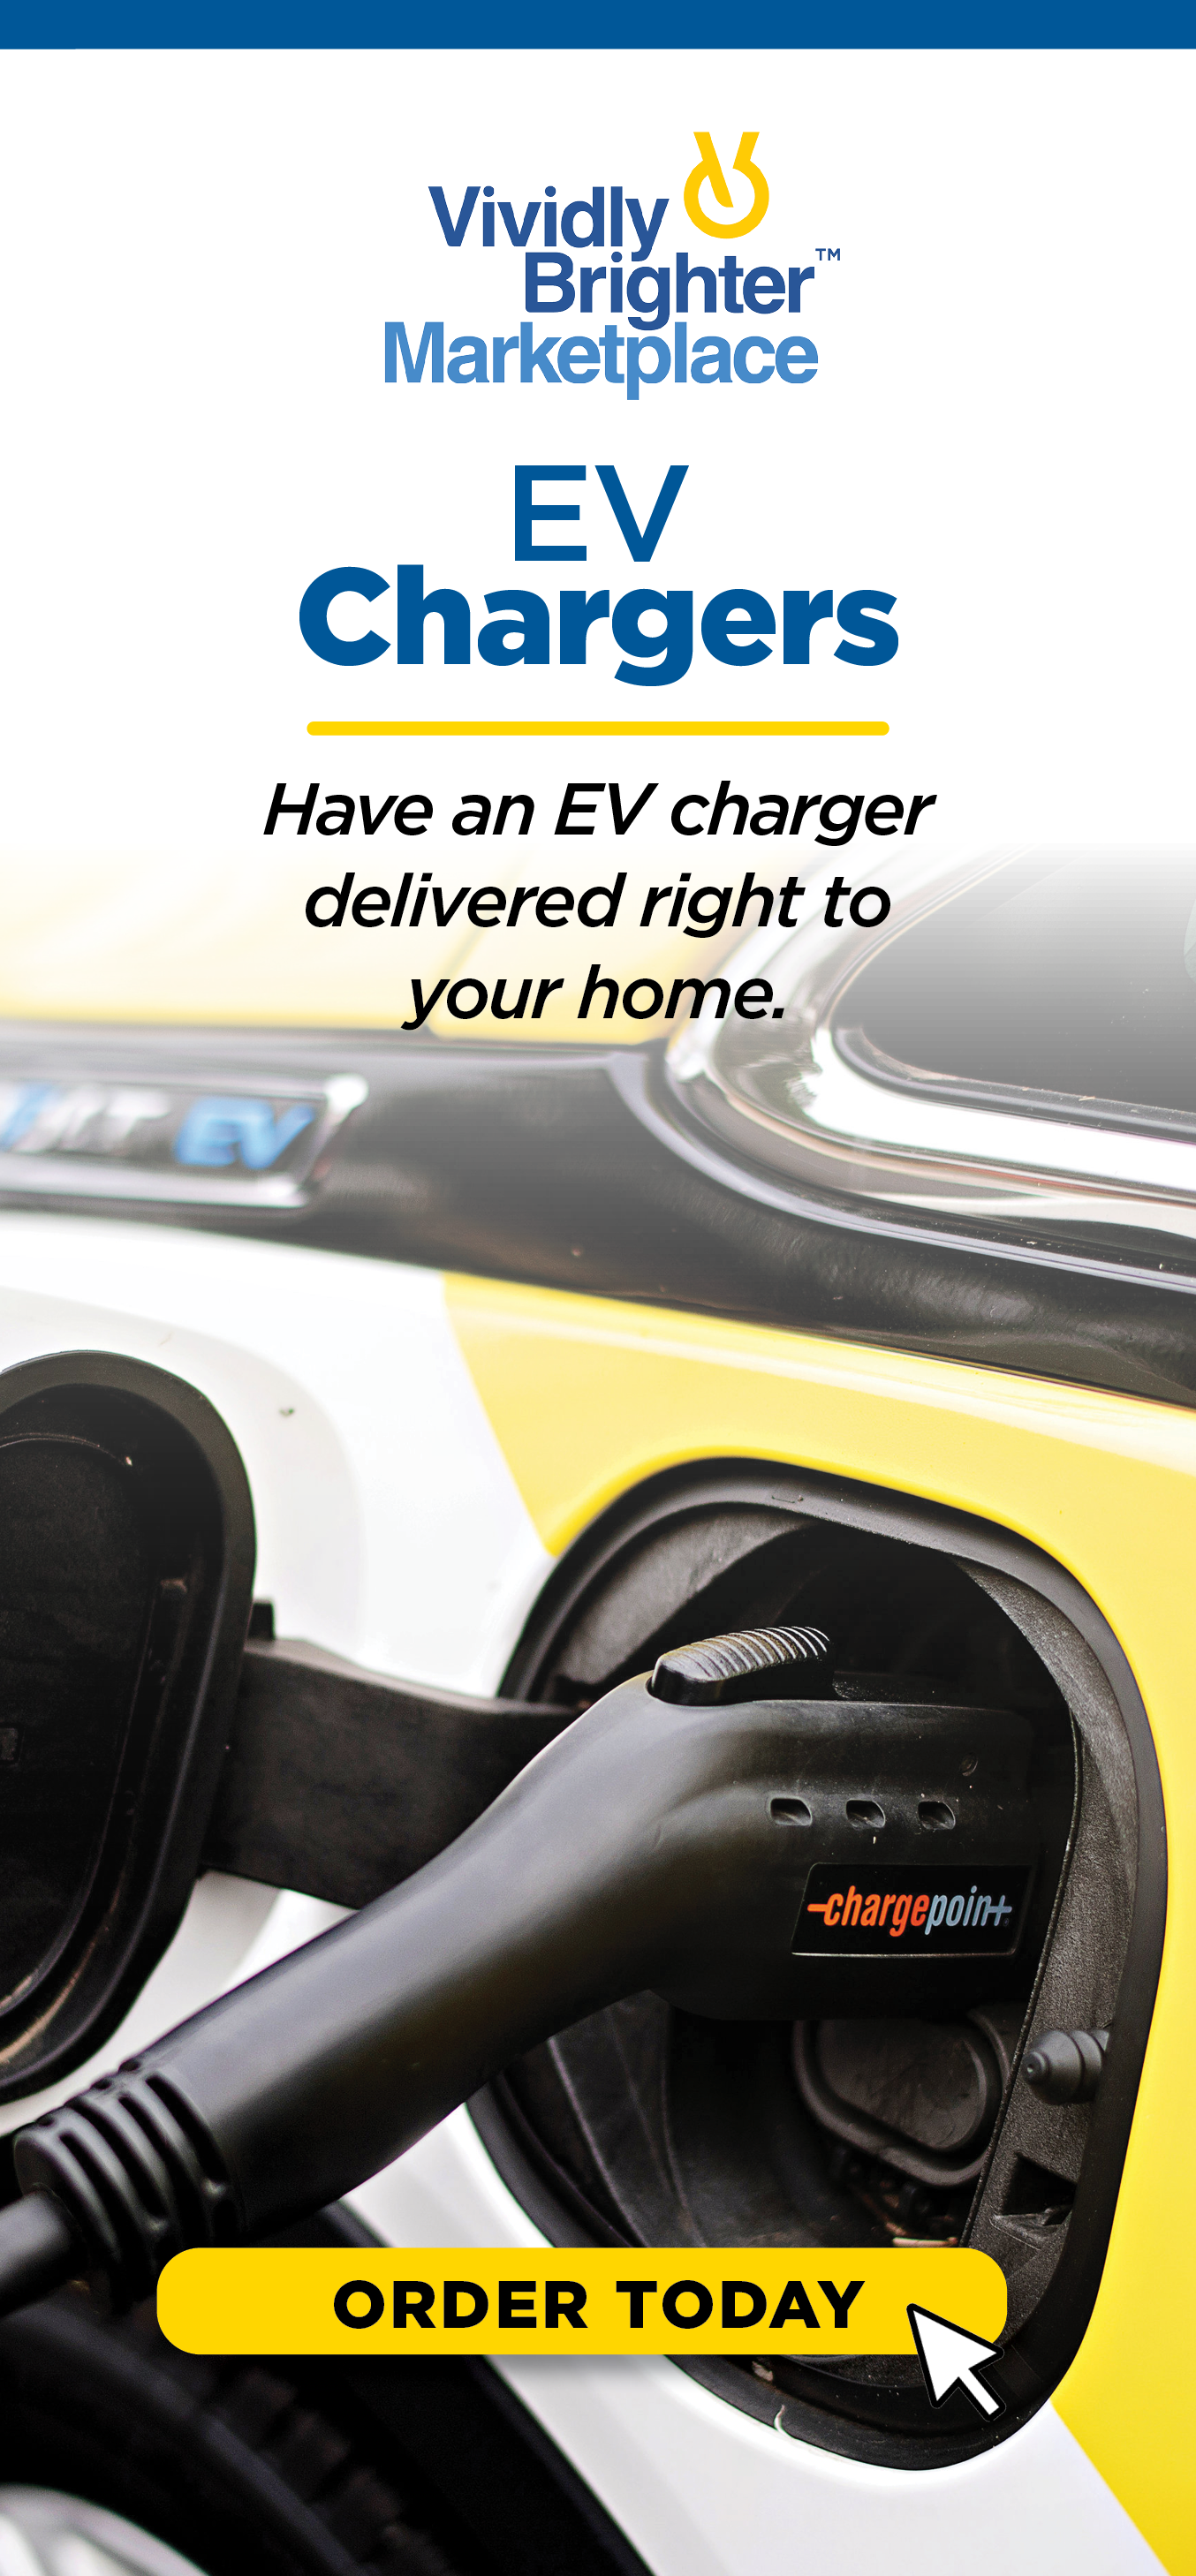 EV Chargers Ad